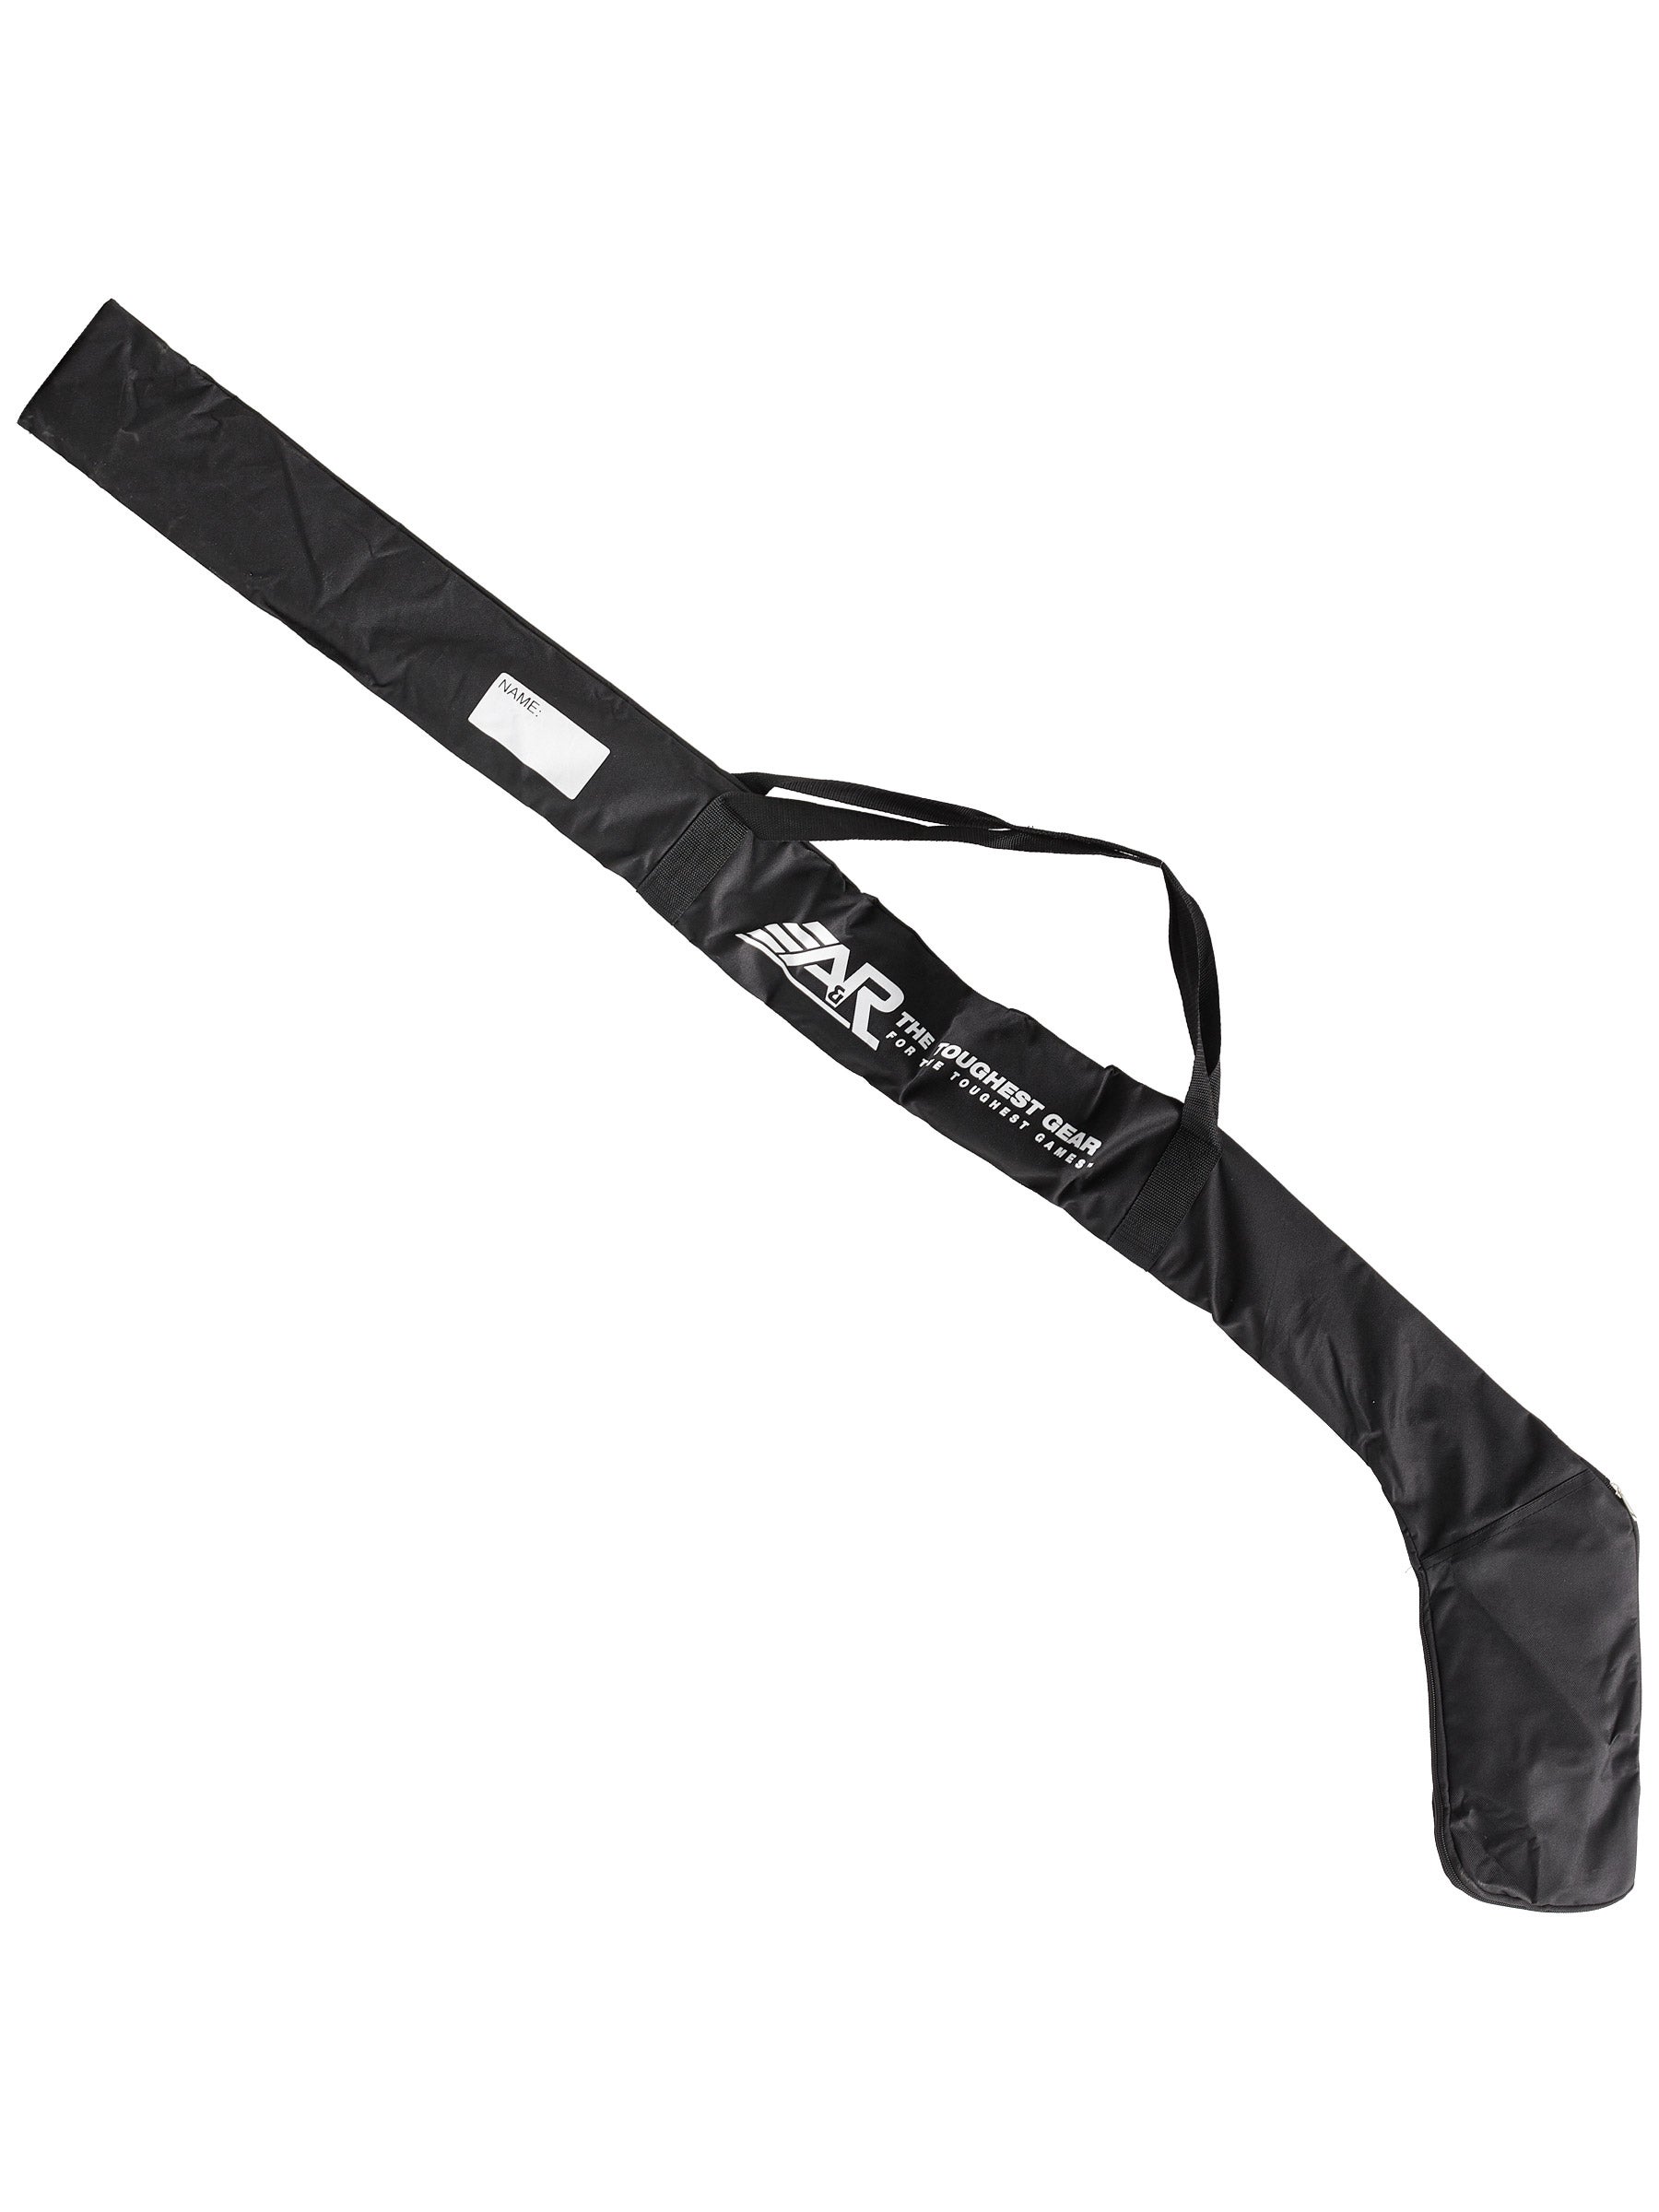 Black A&R Pro Series Hockey Stick Bag Holds Up To 3 Player or 2 Goalie Sticks 